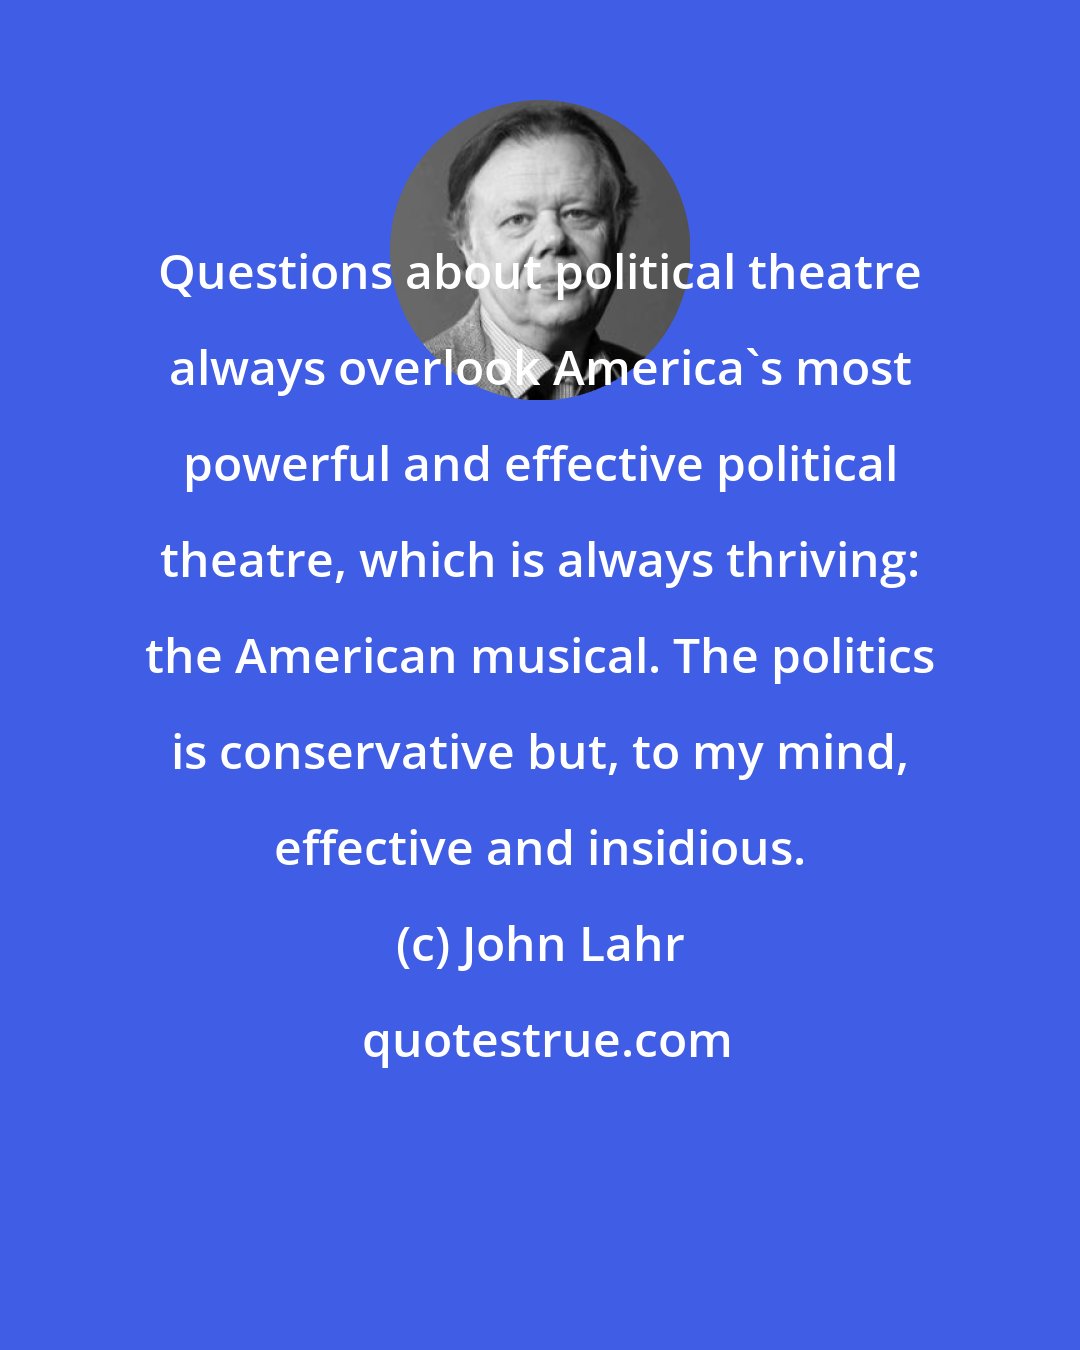 John Lahr: Questions about political theatre always overlook America's most powerful and effective political theatre, which is always thriving: the American musical. The politics is conservative but, to my mind, effective and insidious.